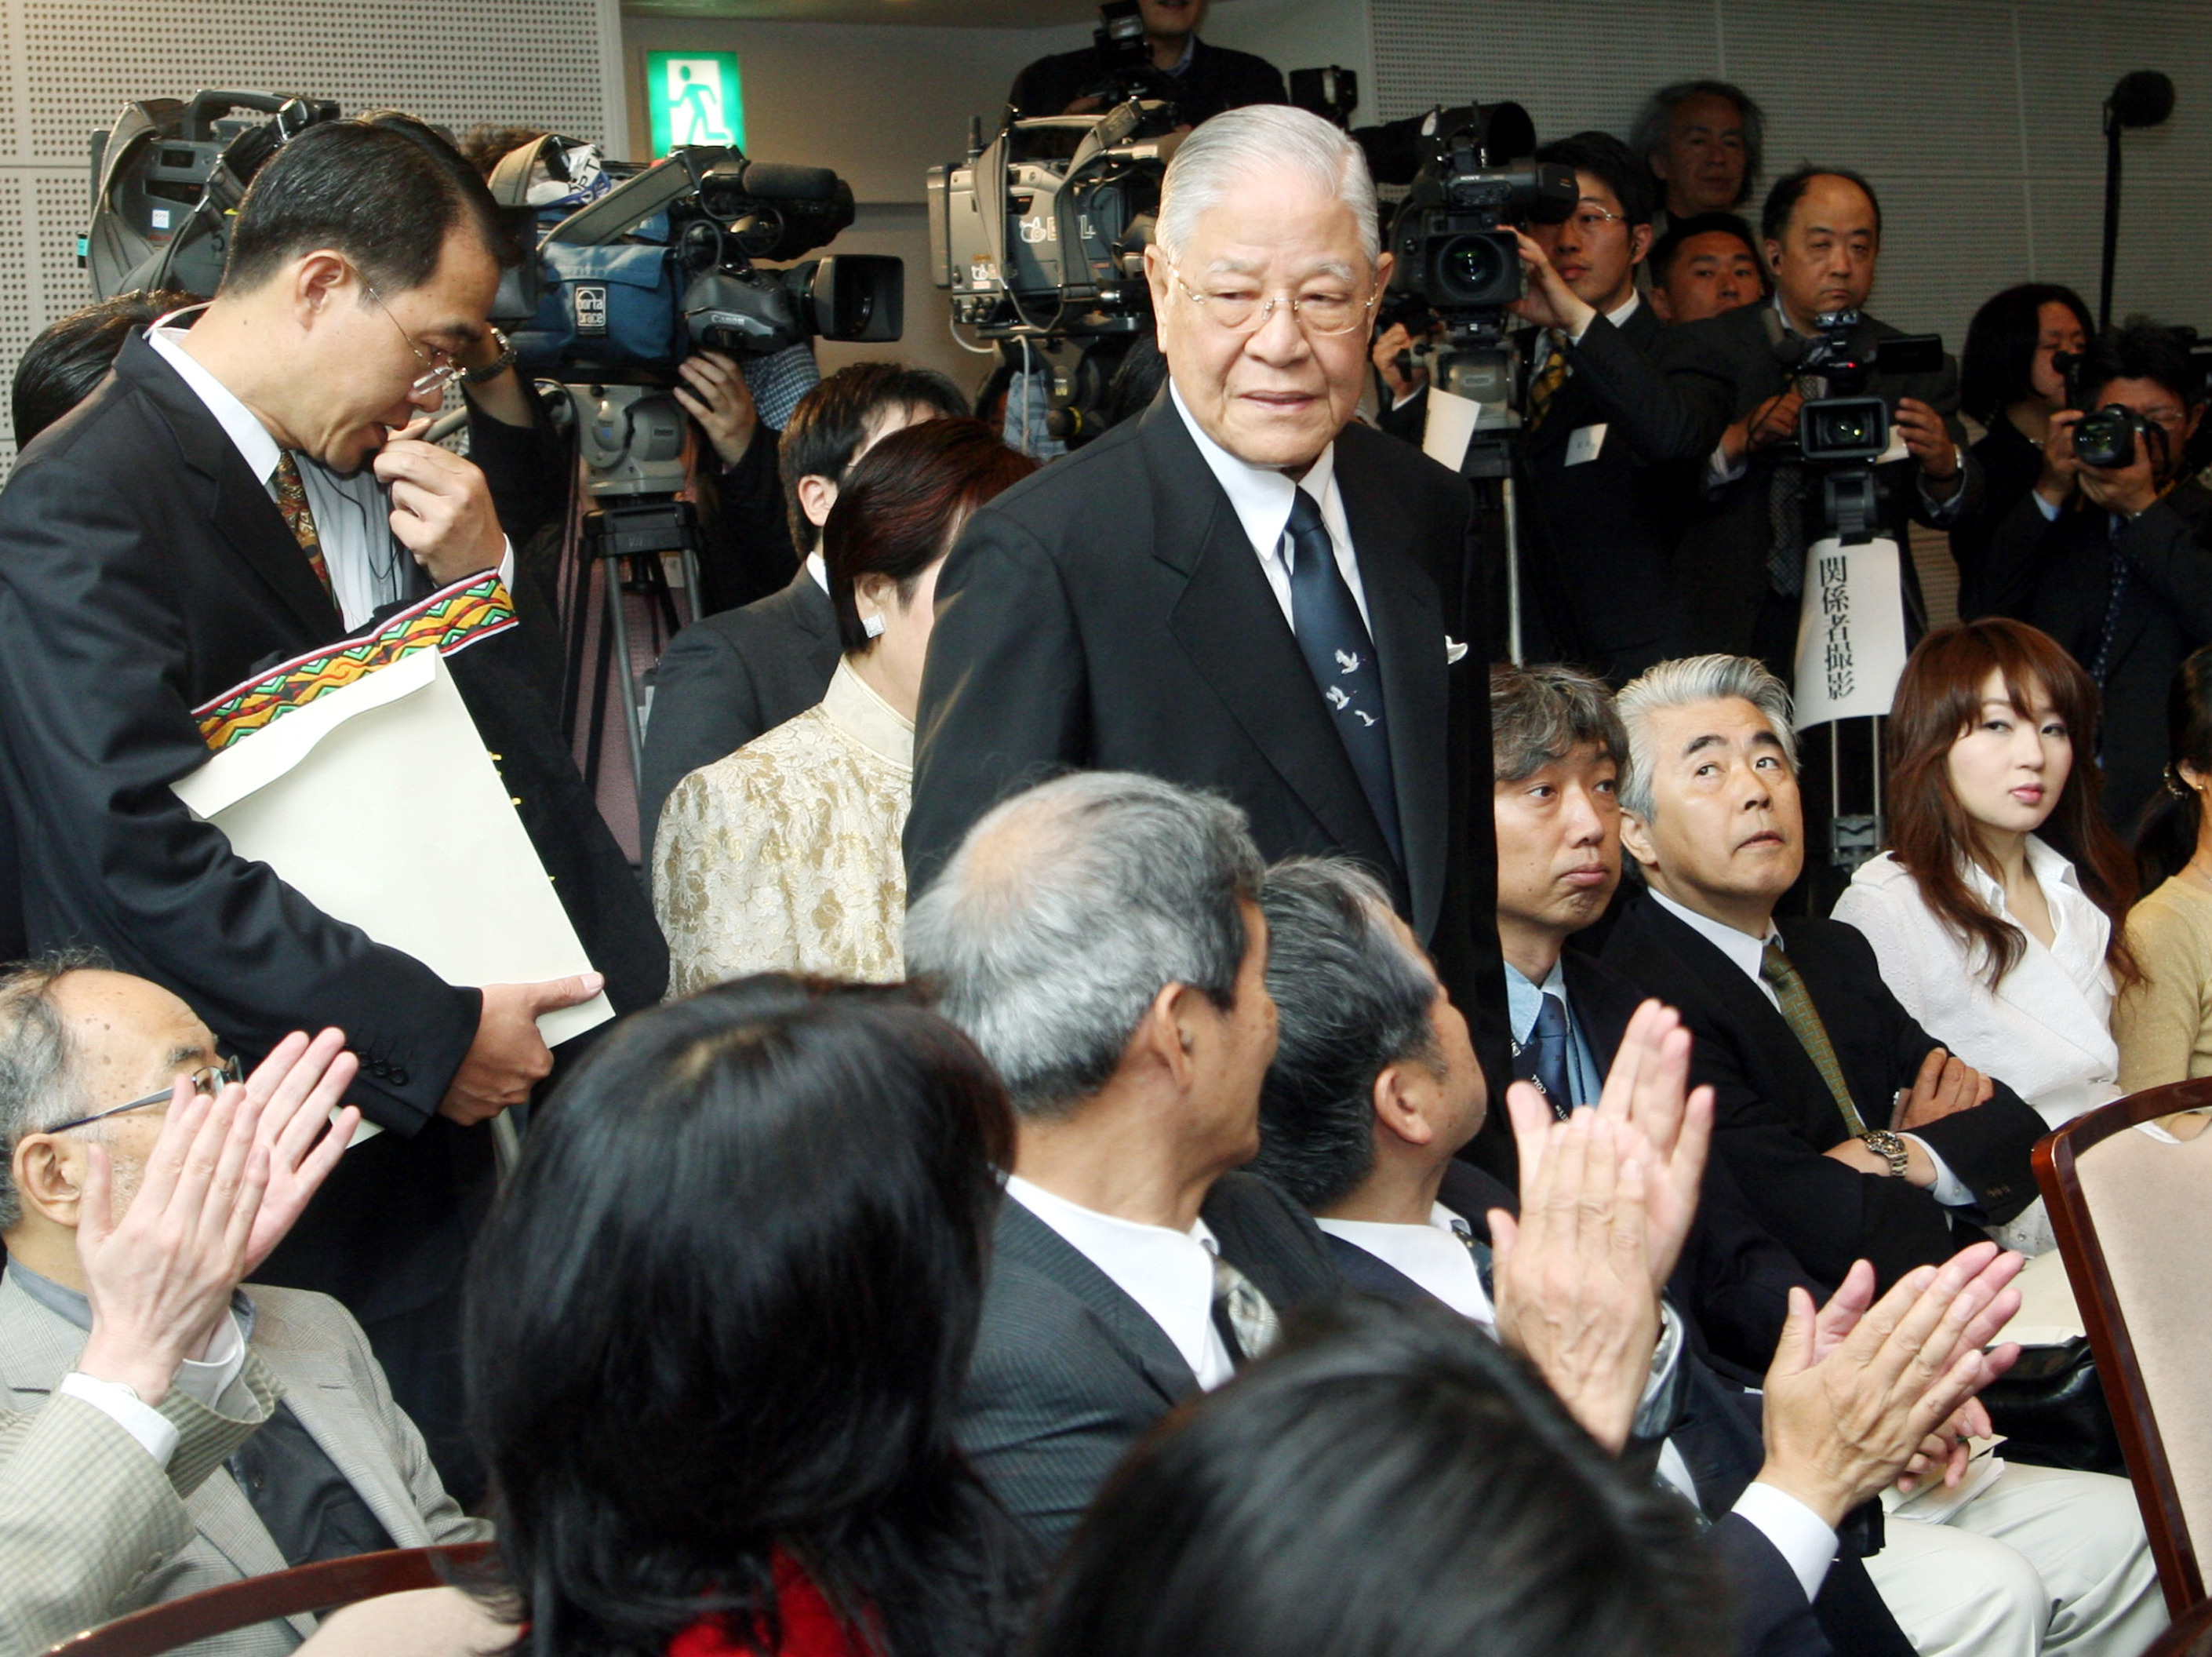 Lee Teng-Hui, center, arrives for a ceremony in Tokyo in 2007.